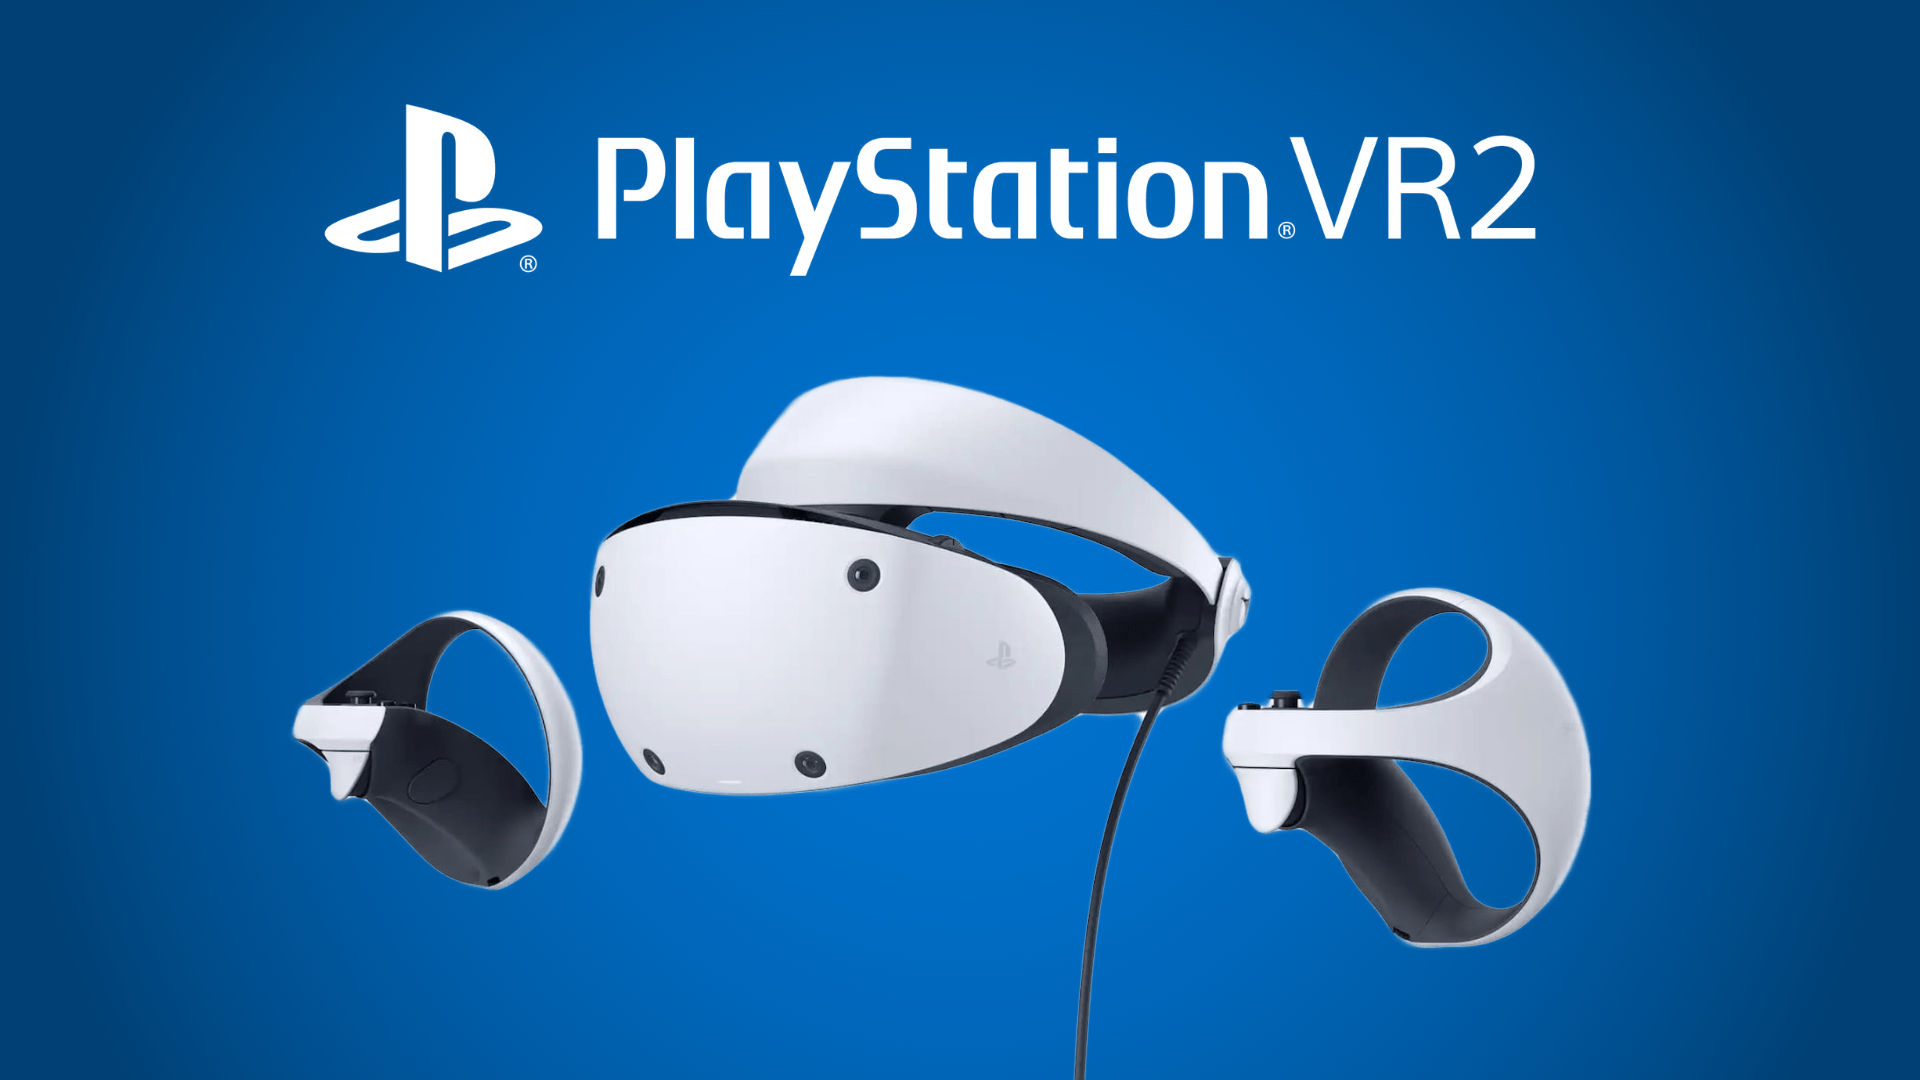 Playstation VR 2 on blue background with writing